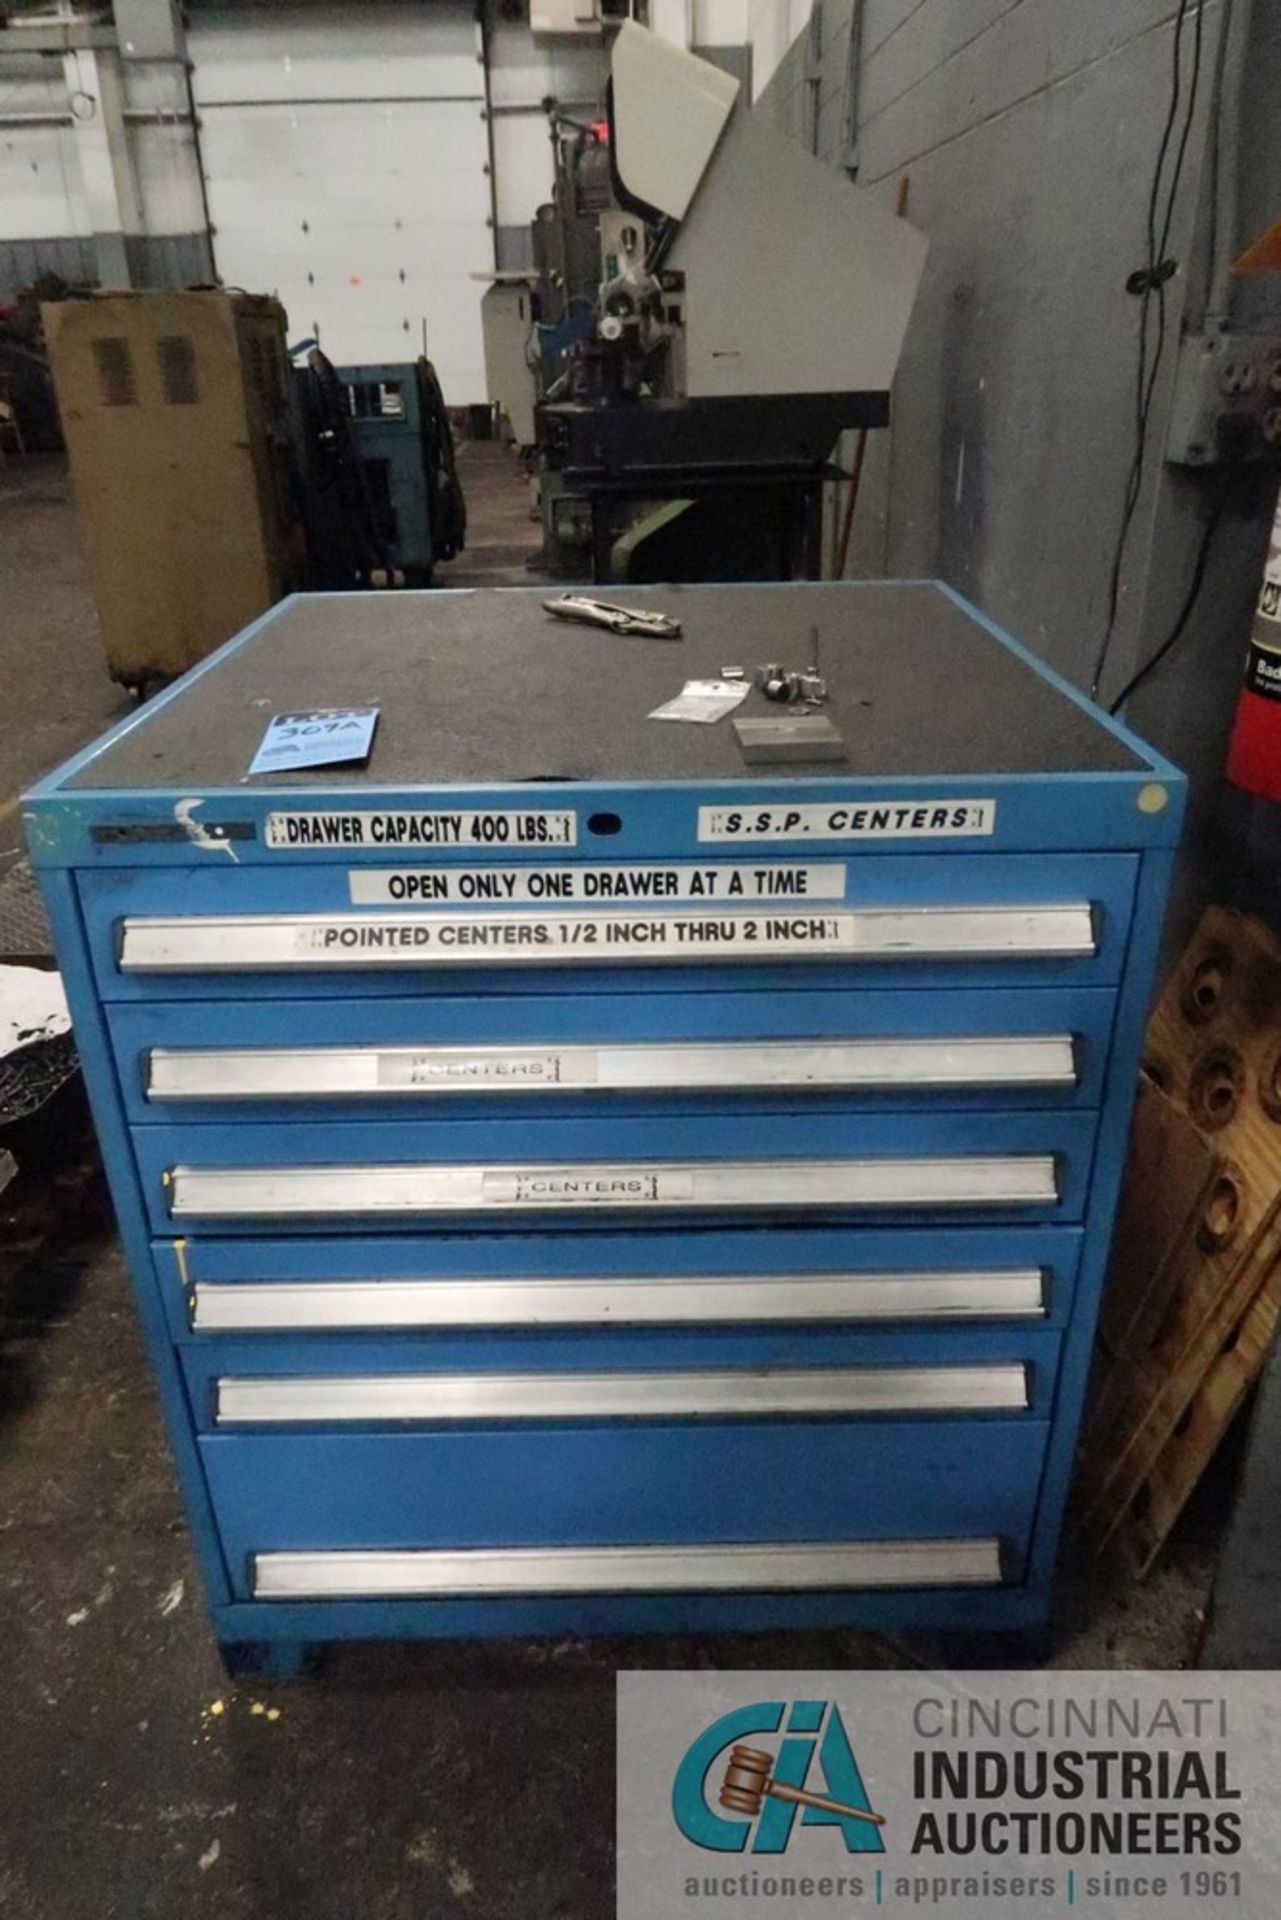 6-DRAWER CABINET WITH MISCELLANEOUS WATERBURY FARREL HI PRO DSSD TOOLING INCLUDING, CASINGS, PUNCH